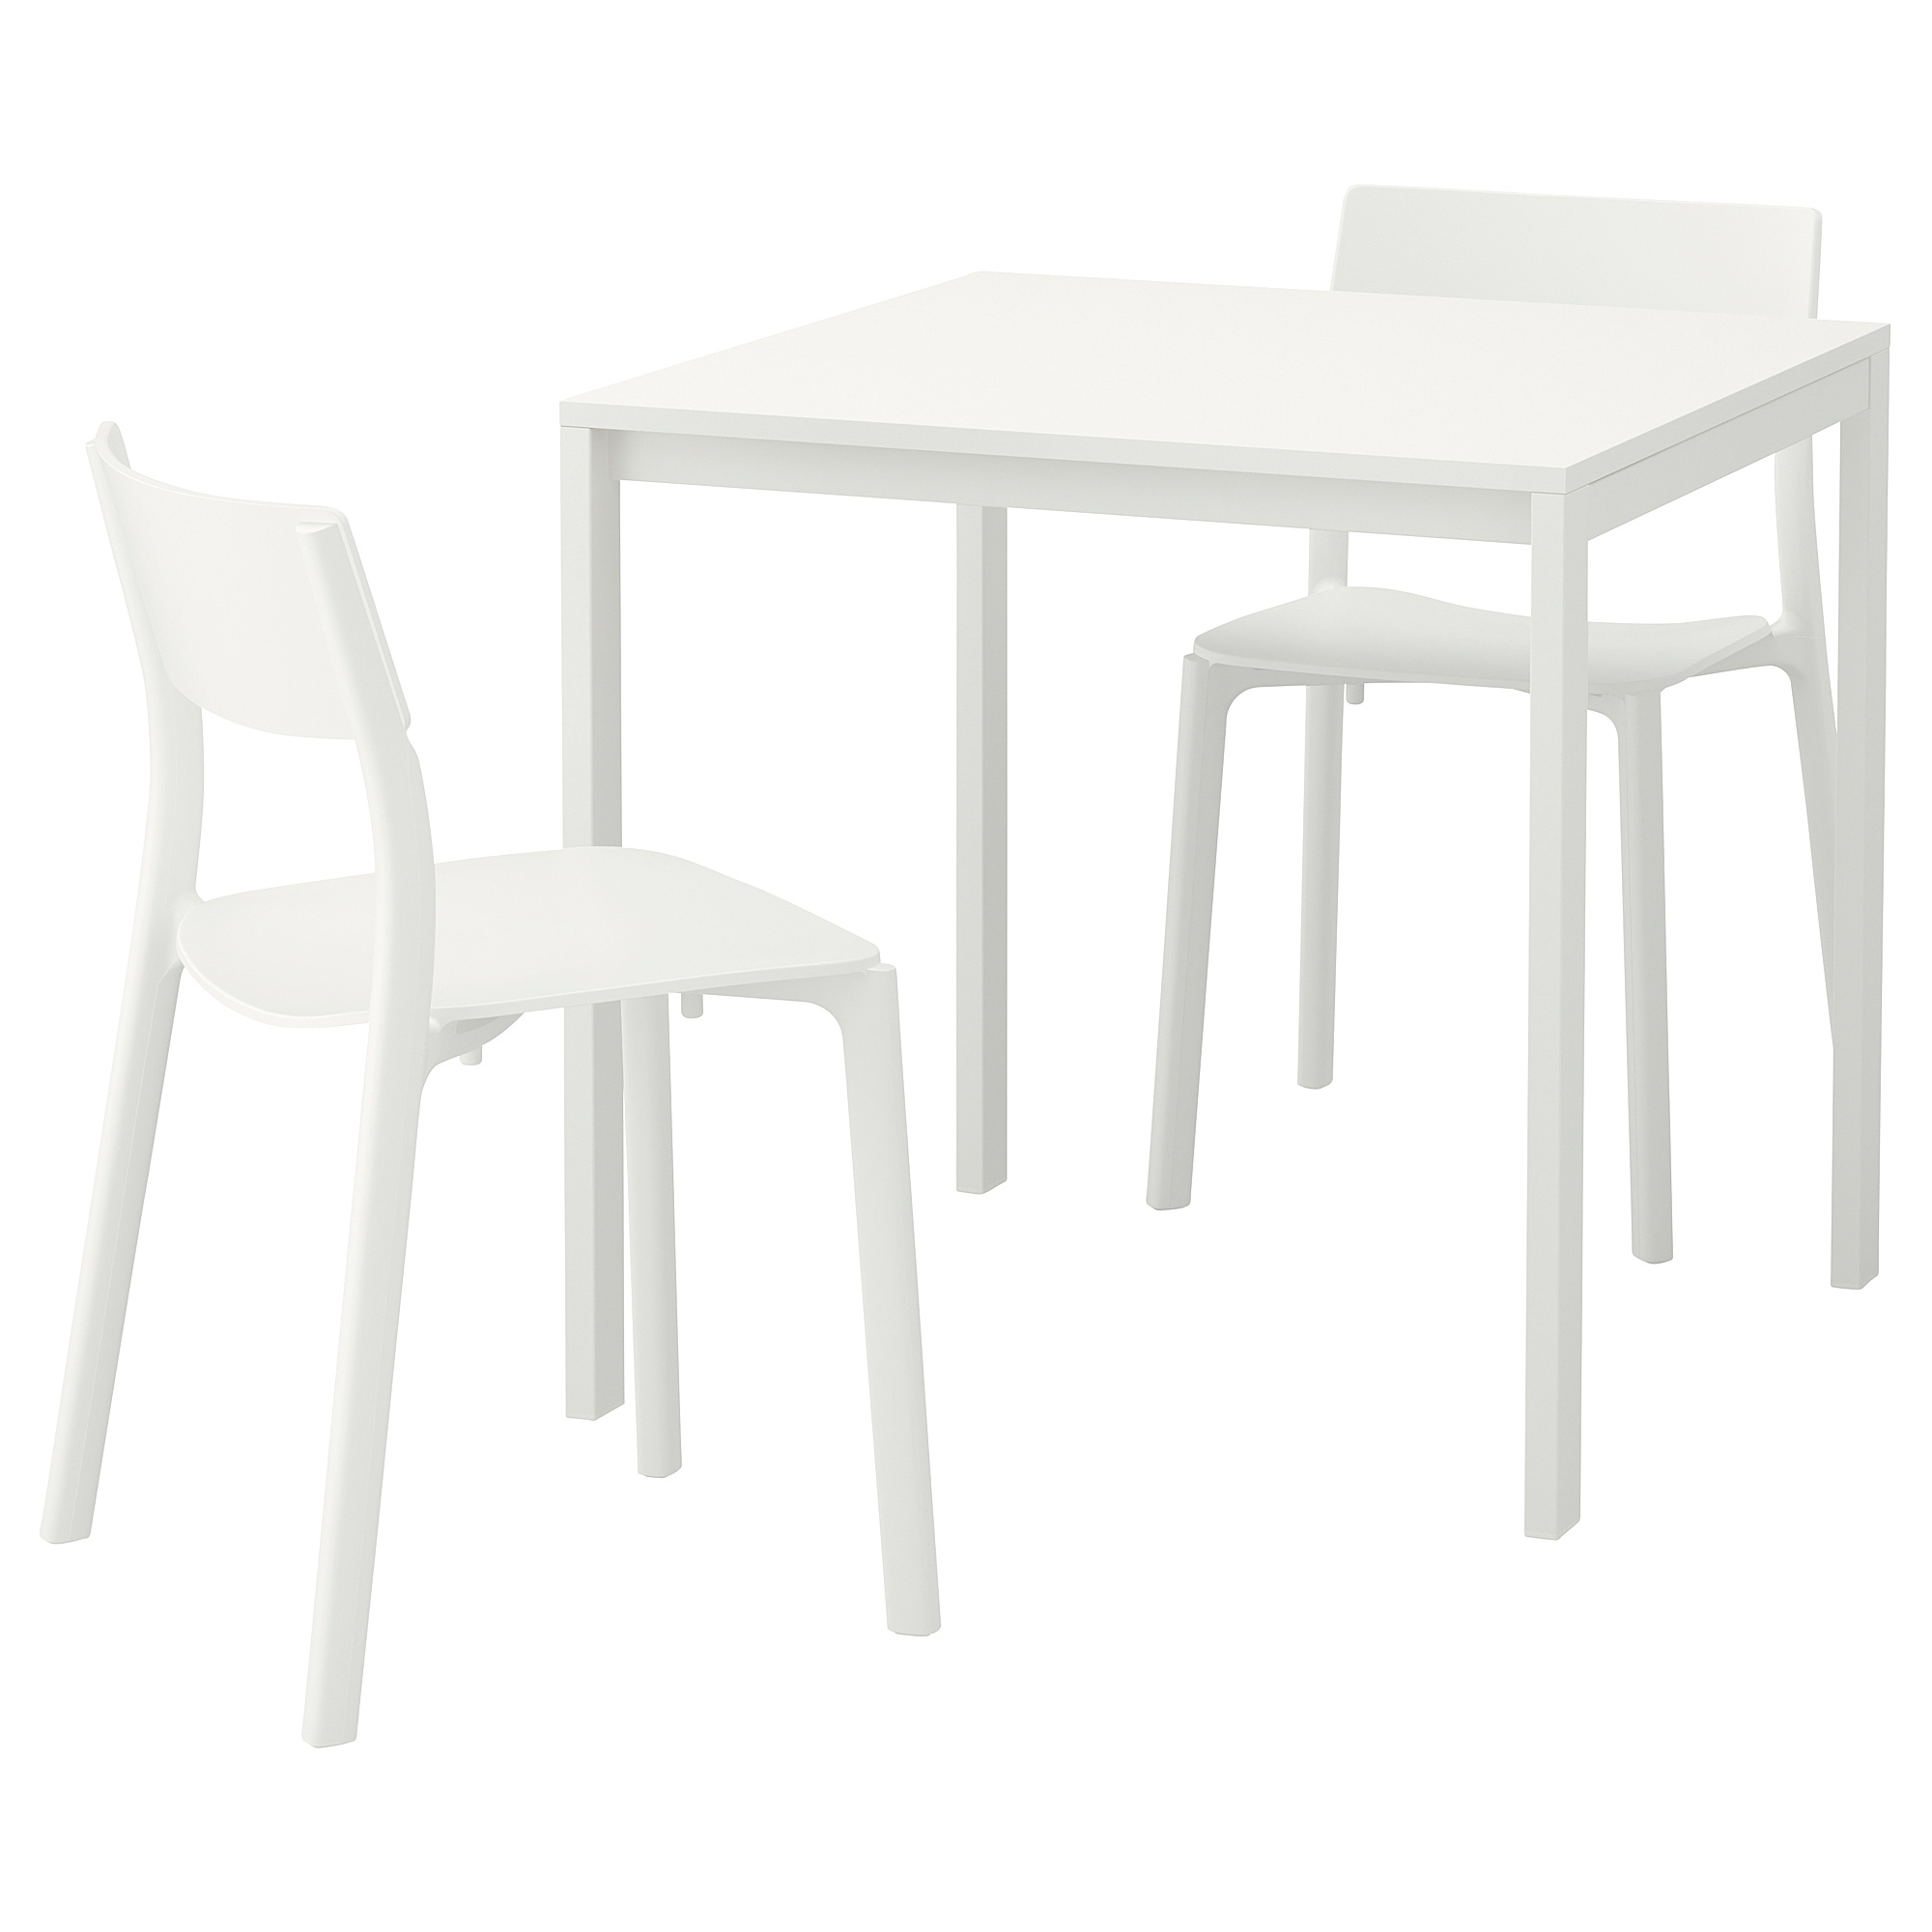 MELLTORP/JANINGE table and 2 chairs